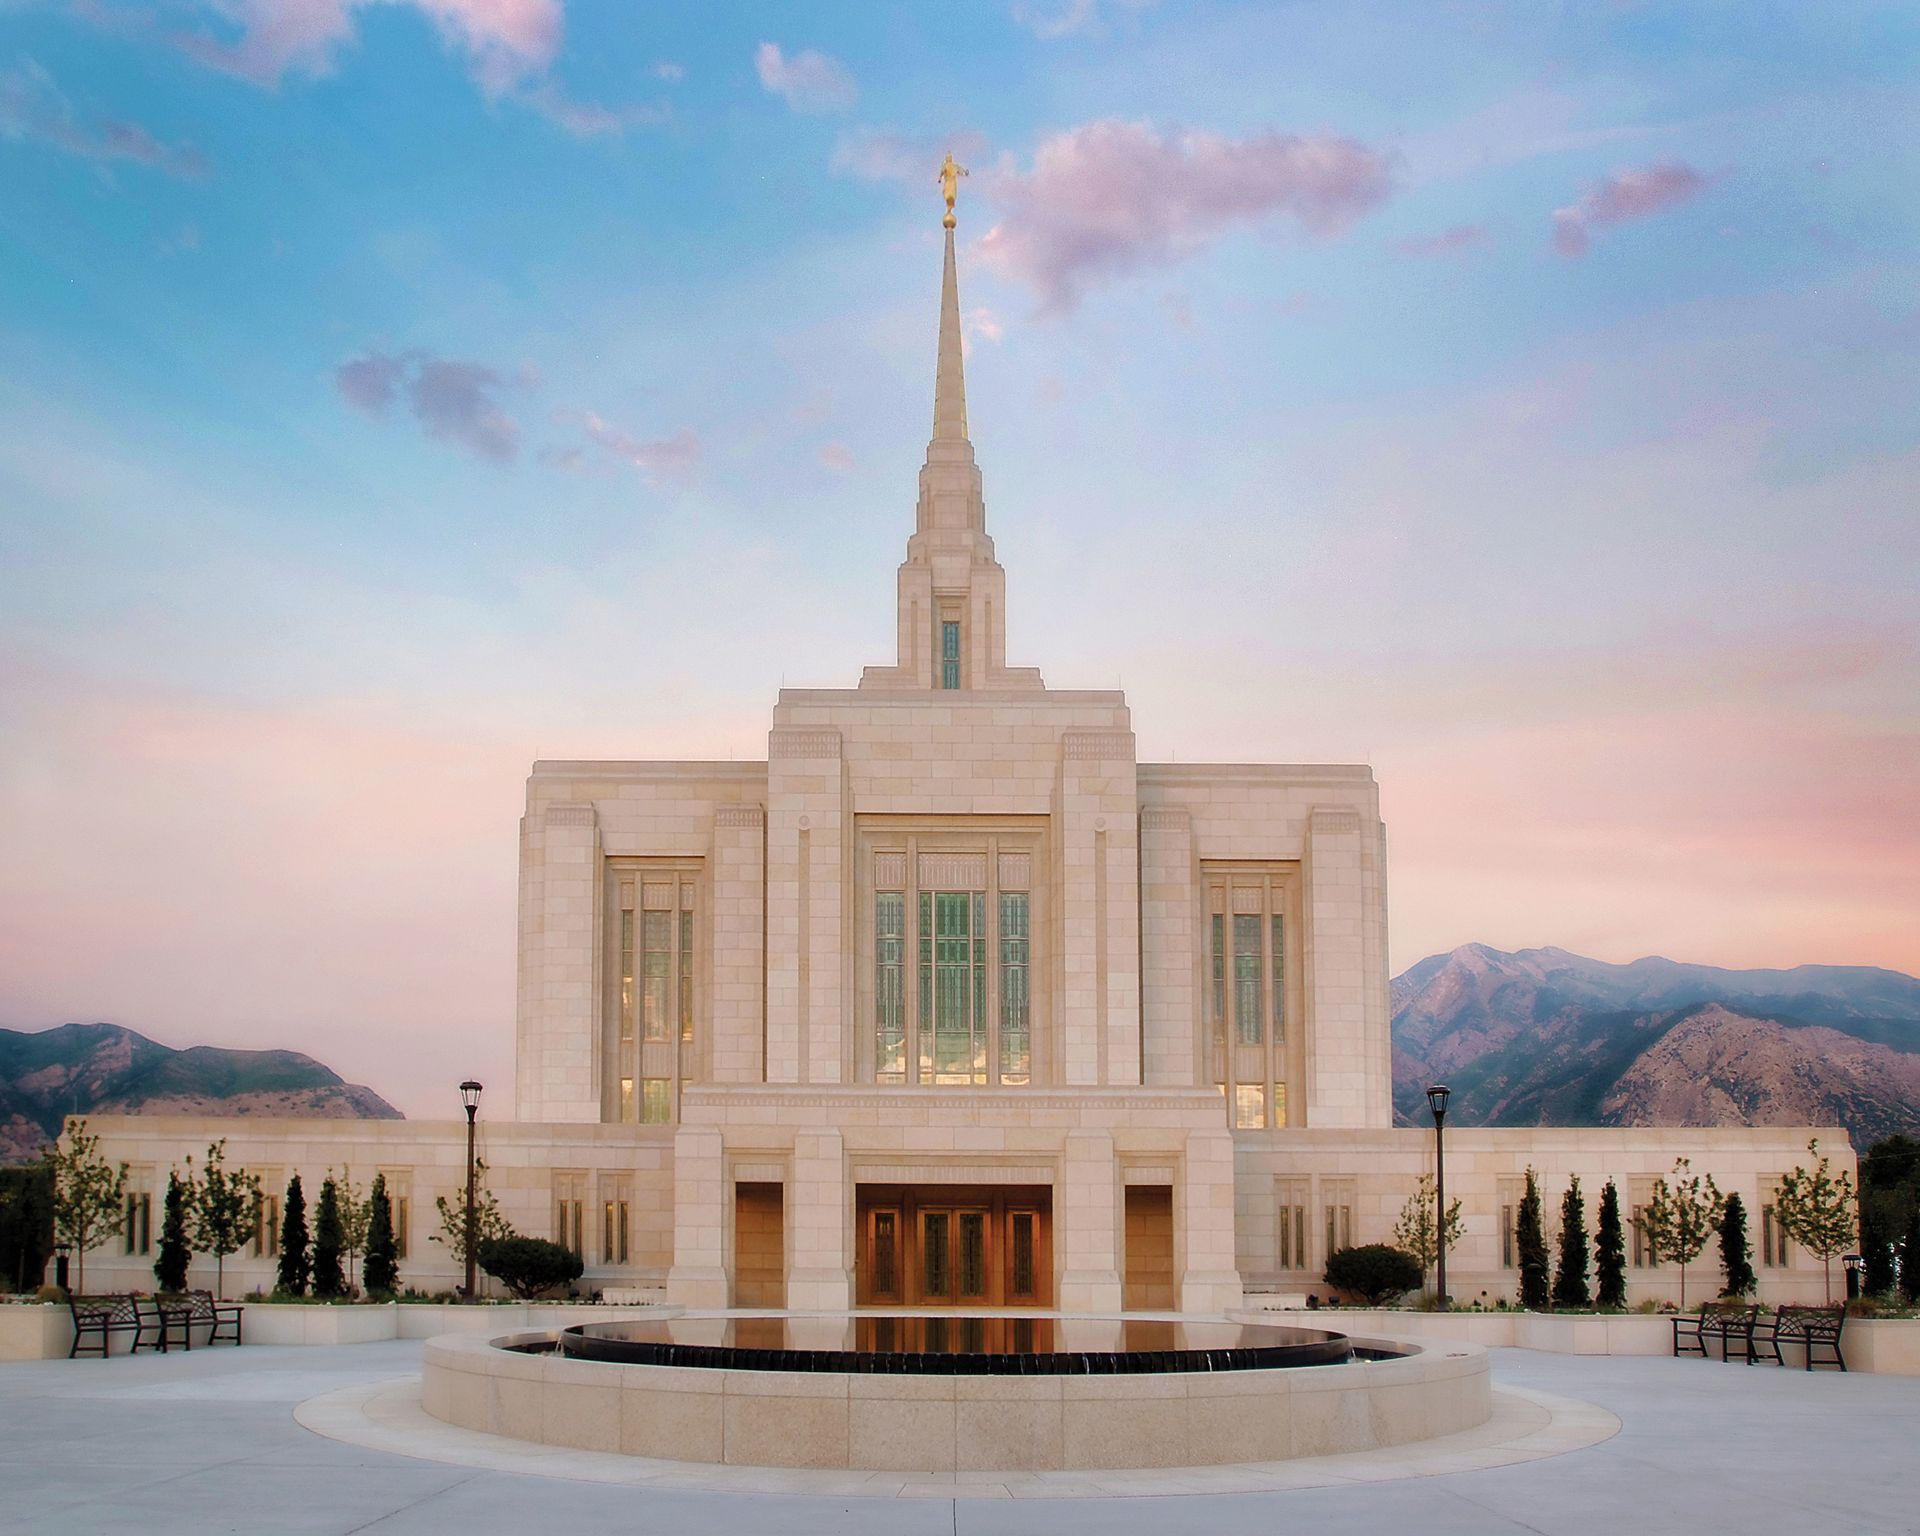 The Ogden Utah Temple, including the entrance, reflection pond, and scenery.